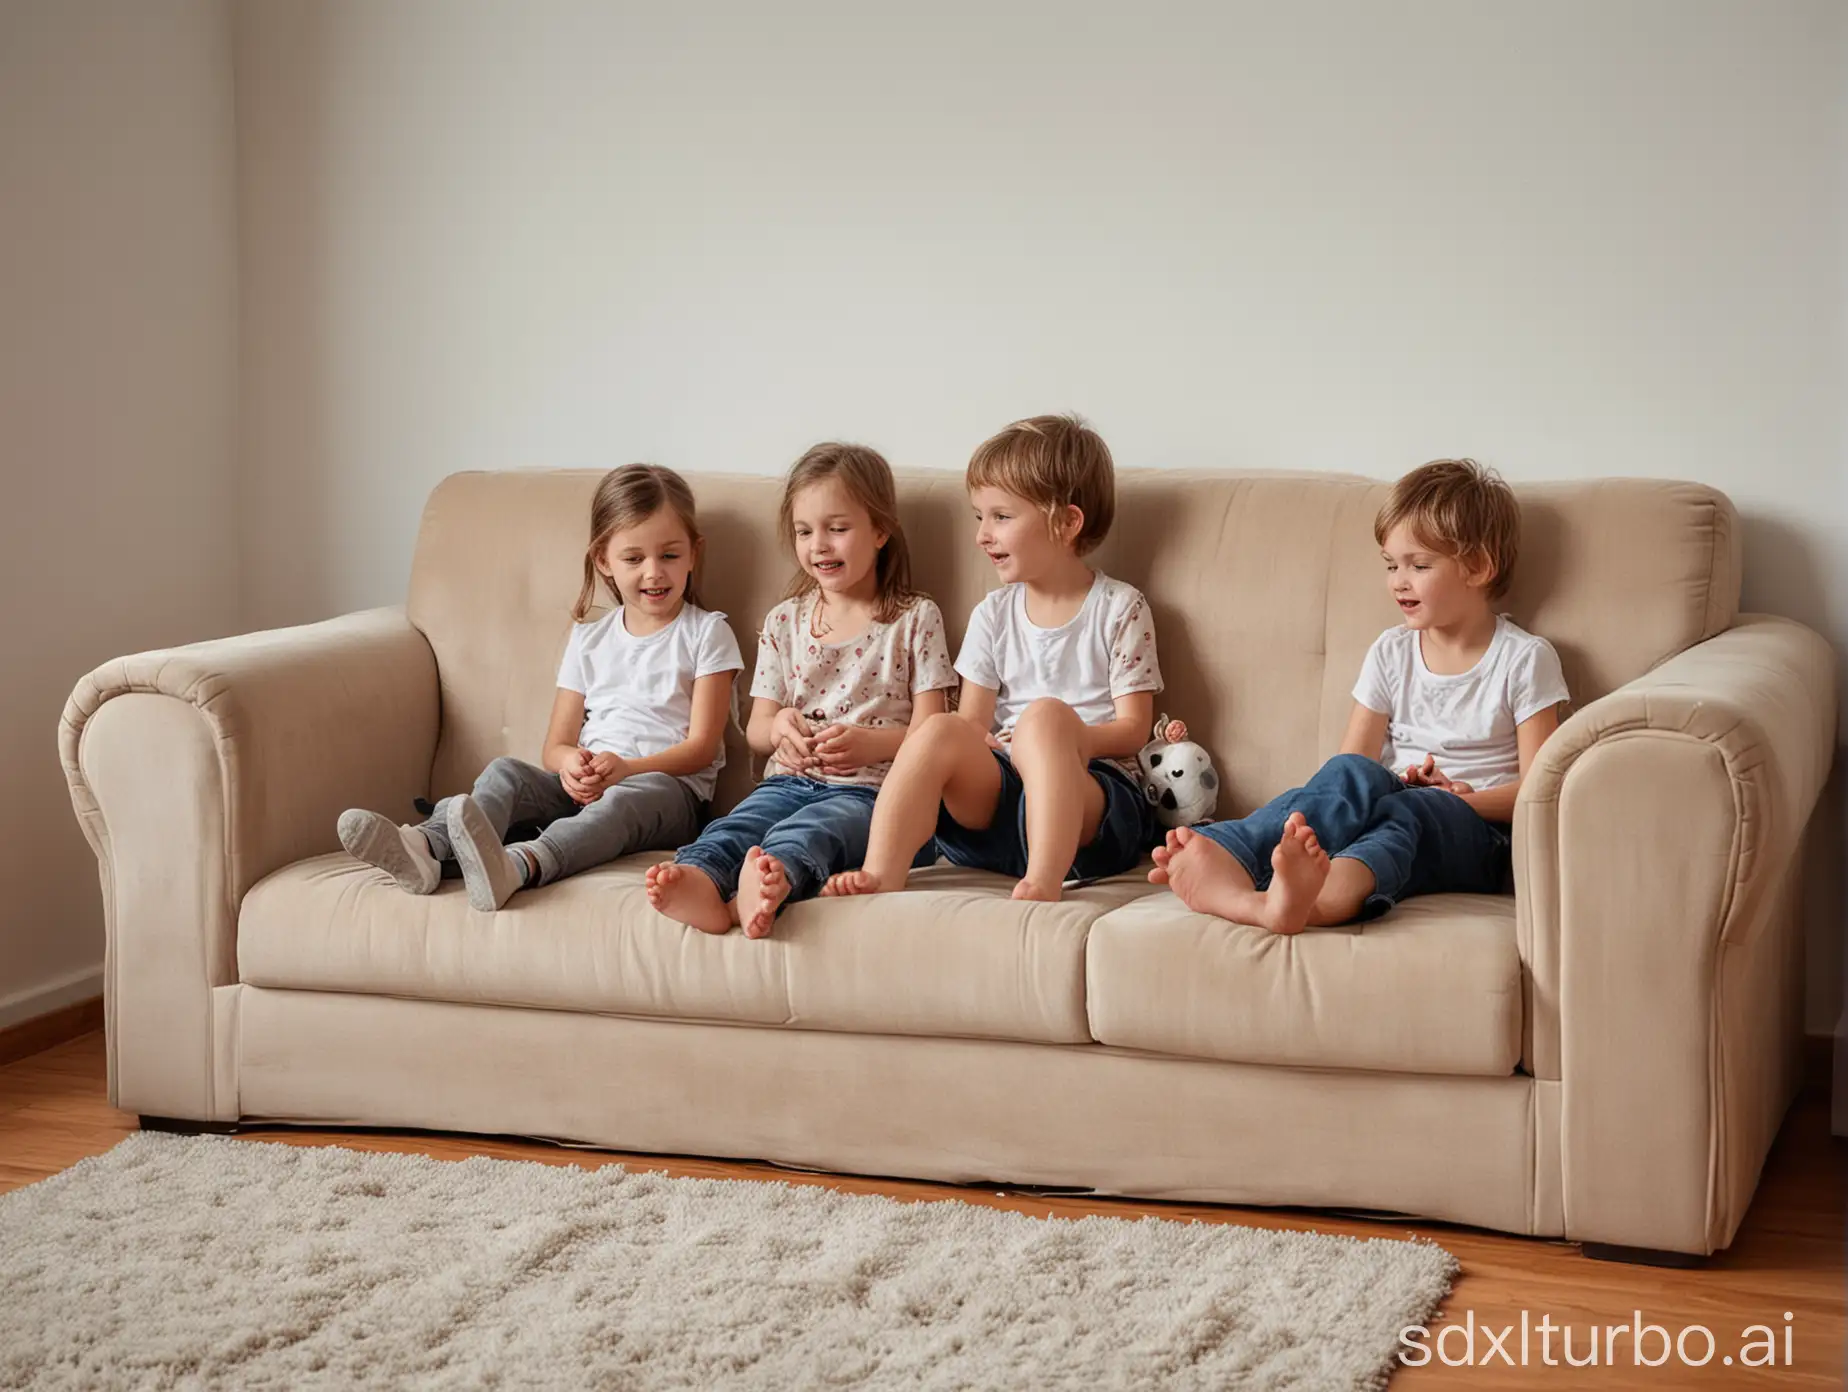 5 to 6 years kids playing in sofa